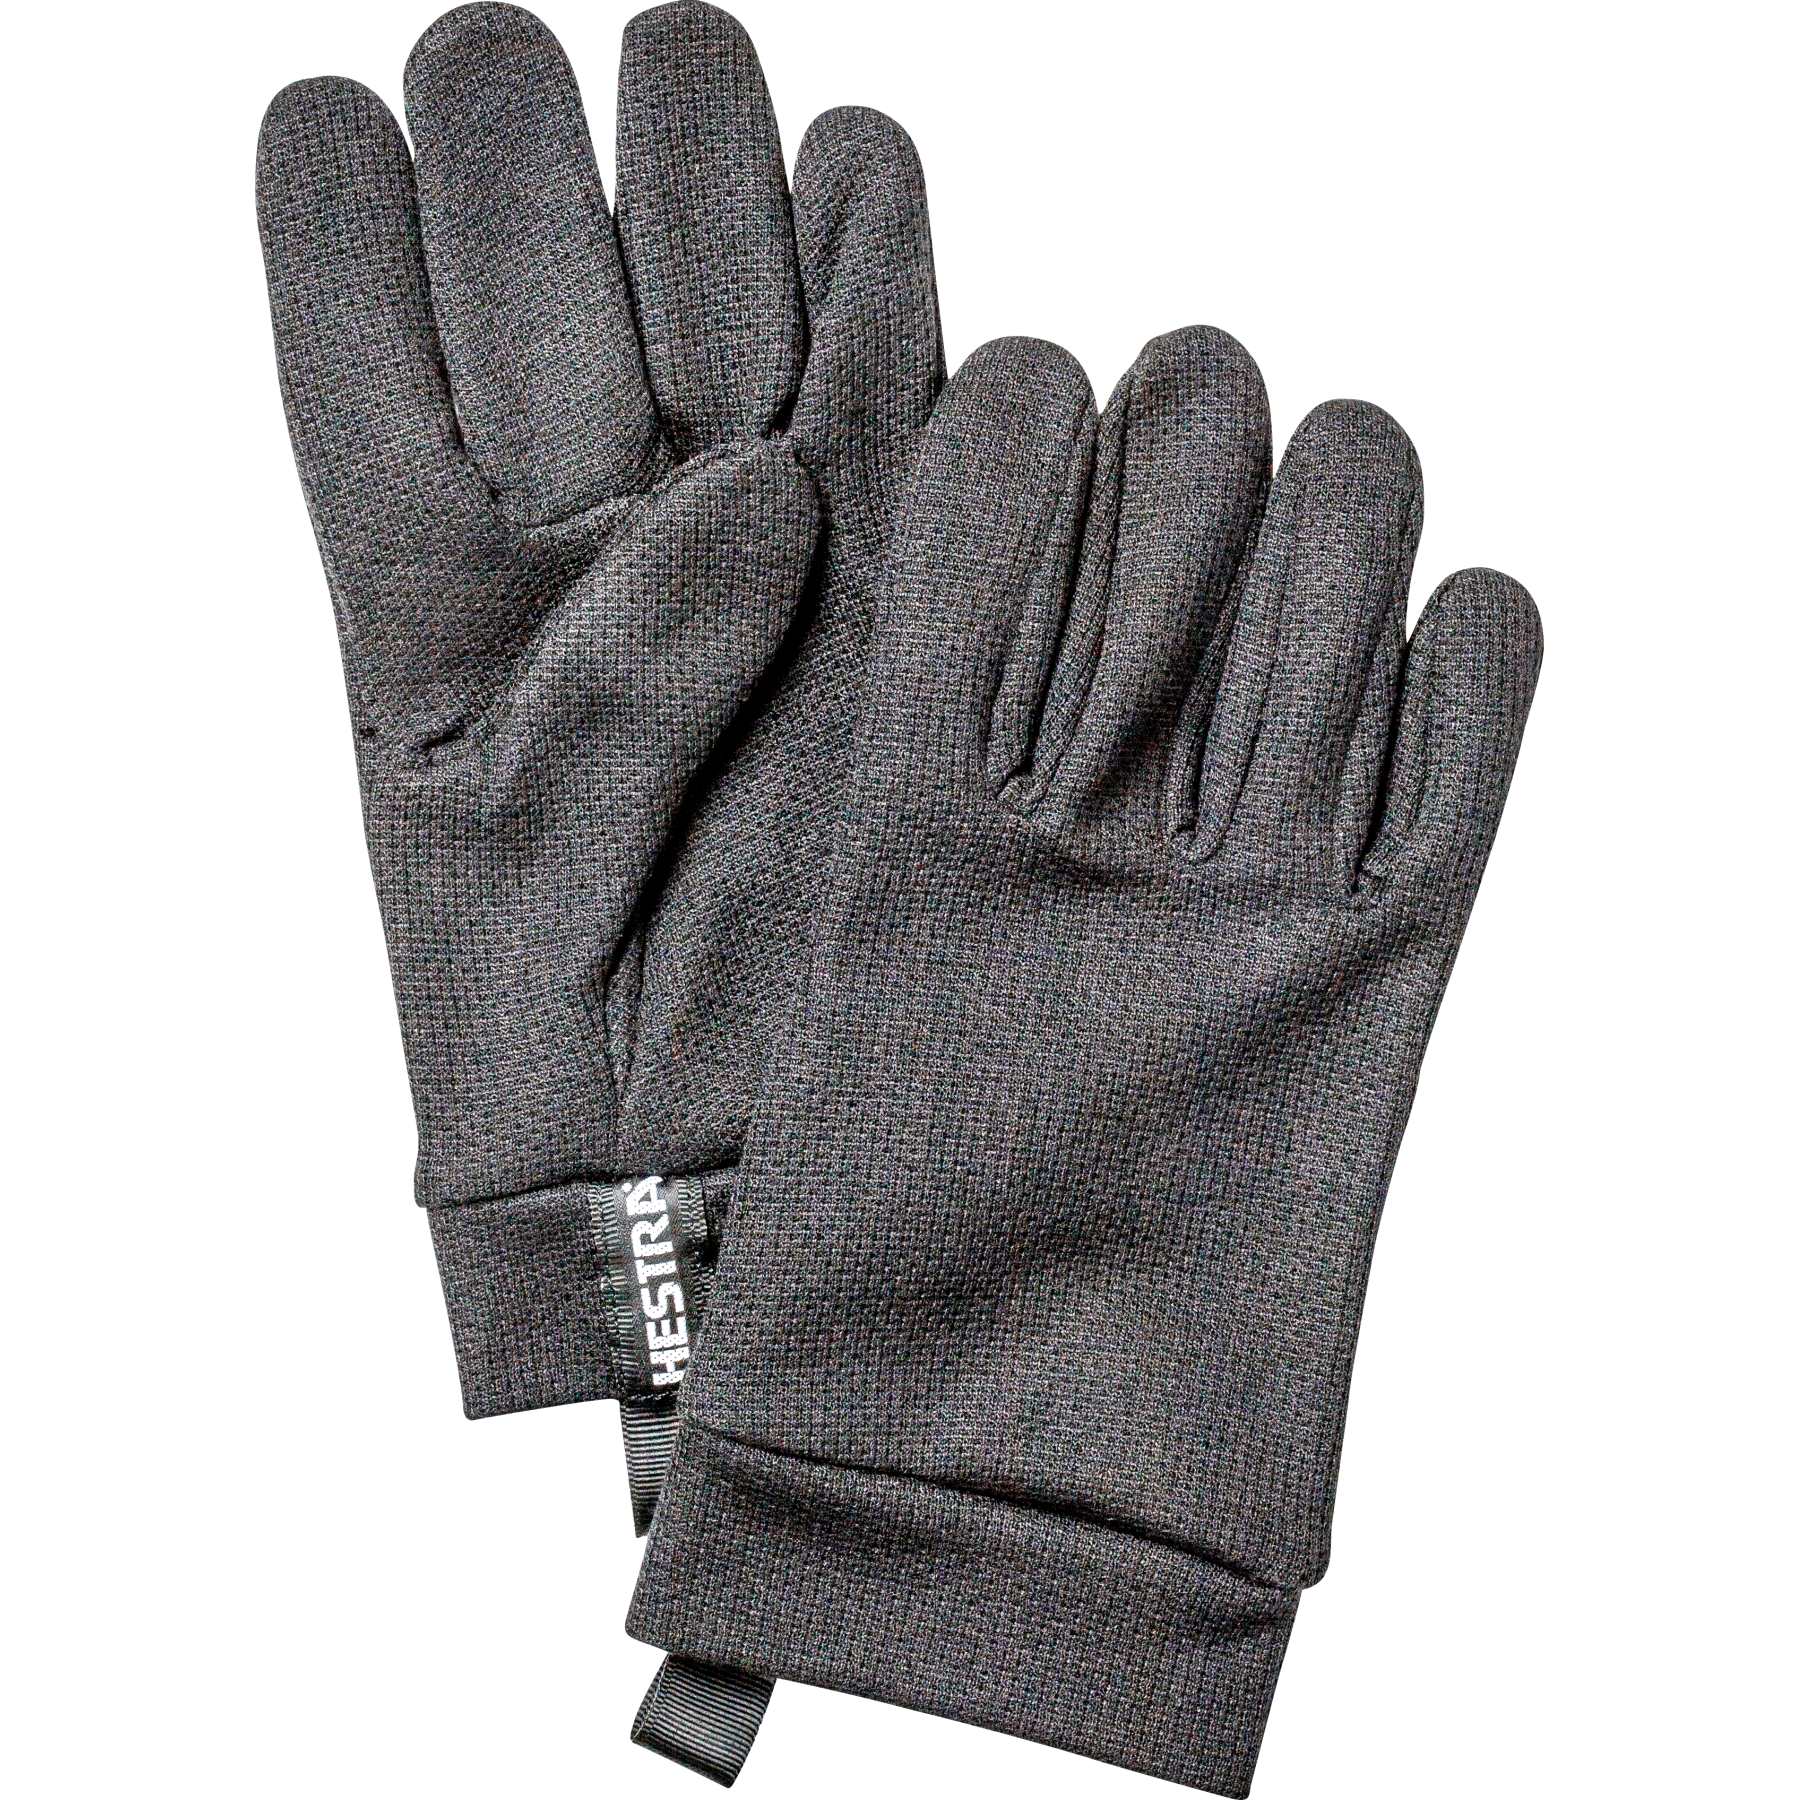 Picture of Hestra Multi Active - 5 Finger Liner Gloves - charocoal